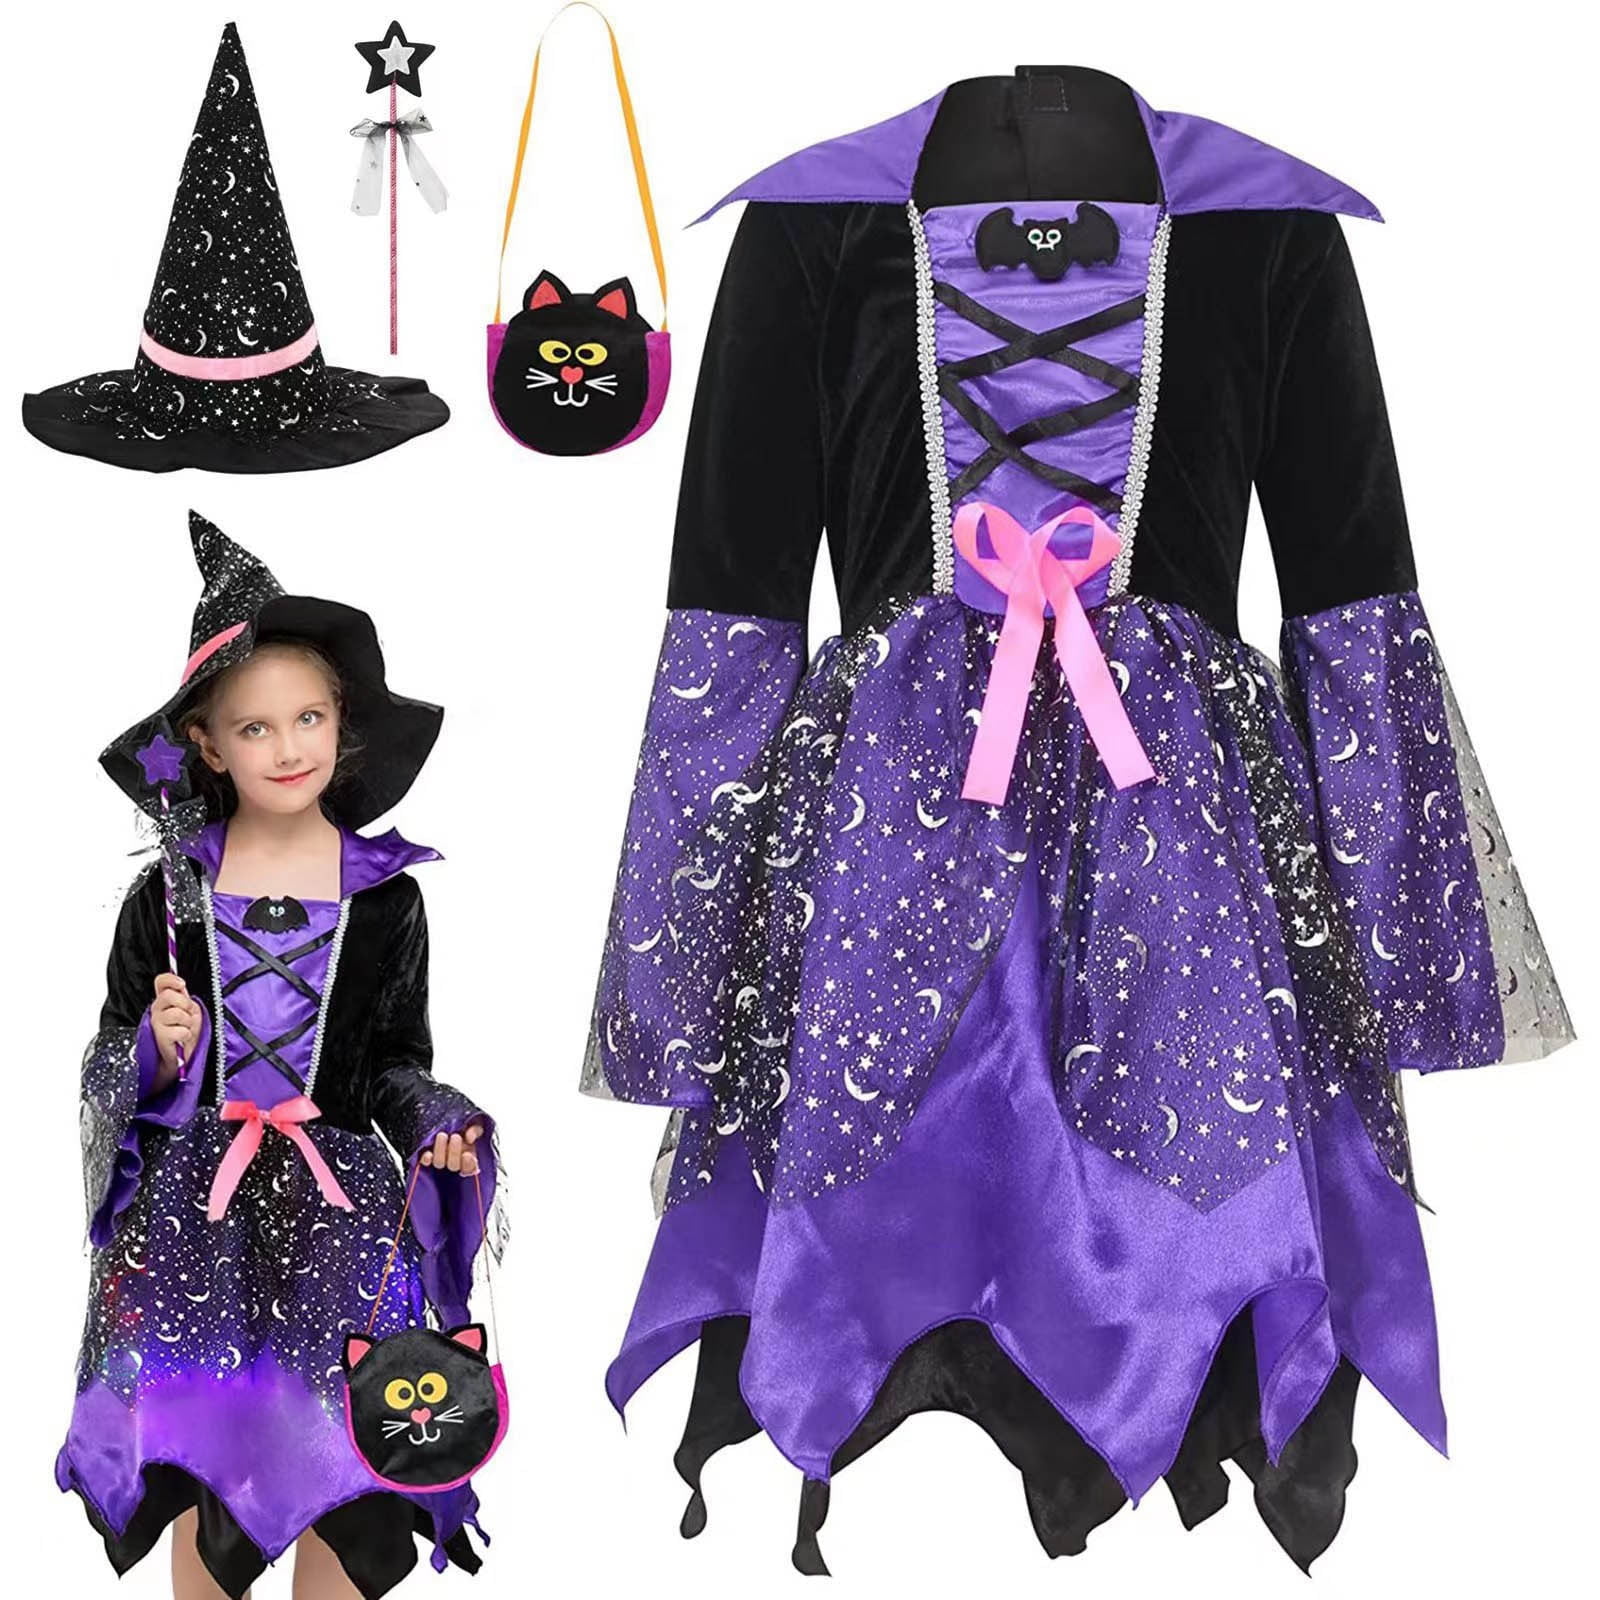 Zcfzjw Toddler Kids Halloween Fancy Dress Up Costumes Clothes 2023 Trendy Cute Baby Girls Cosplay Party Princess Dress Outfits with Head Wear Set Z09